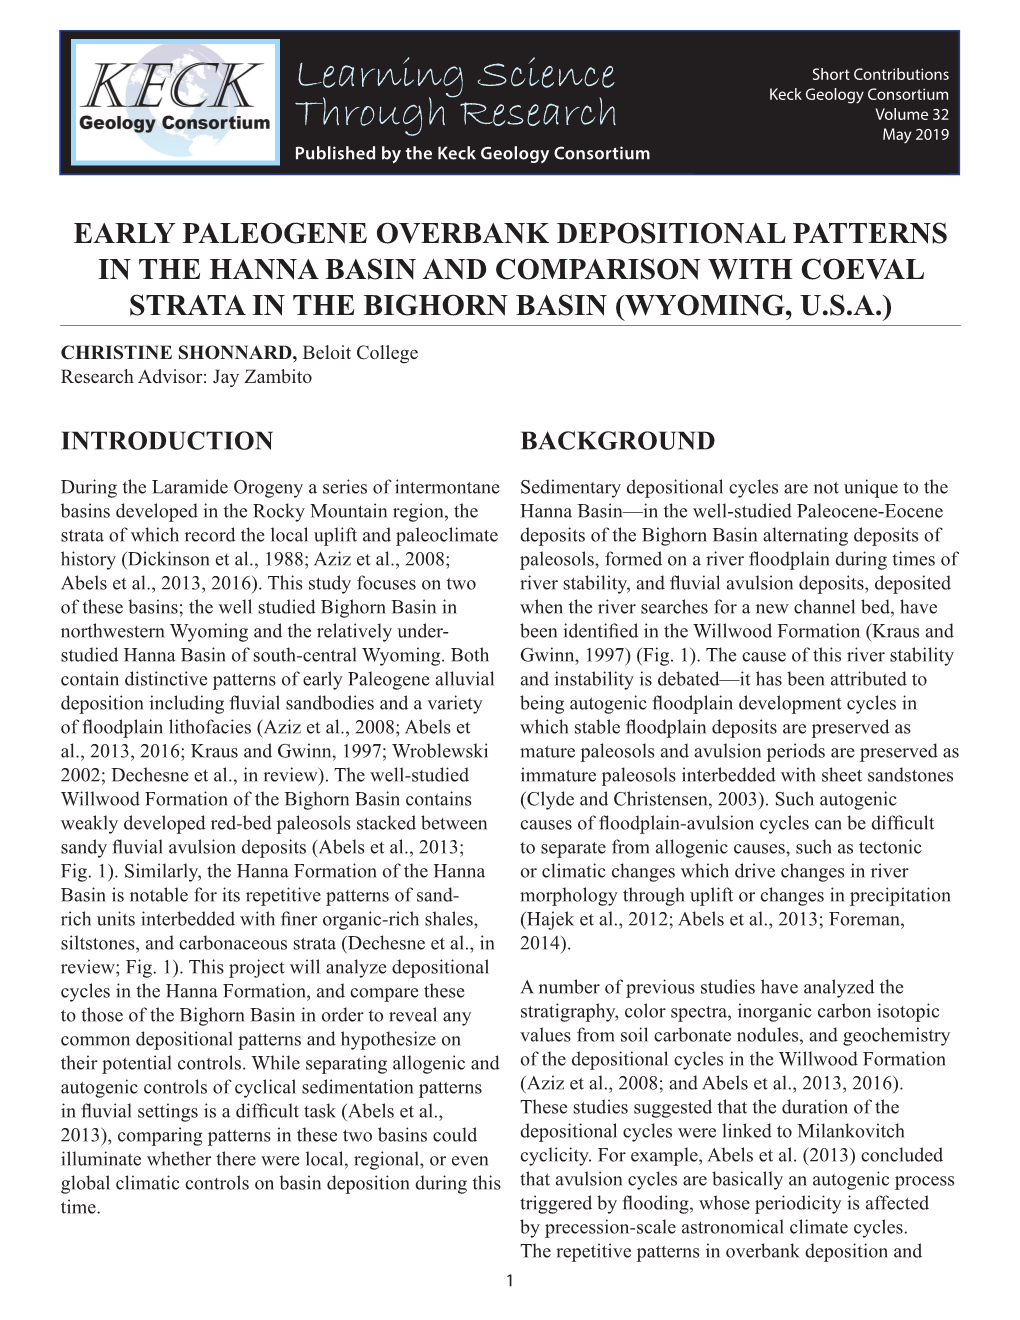 Early Paleogene Overbank Depositional Patterns in the Hanna Basin and Comparison with Coeval Strata in the Bighorn Basin (Wyoming, U.S.A.)